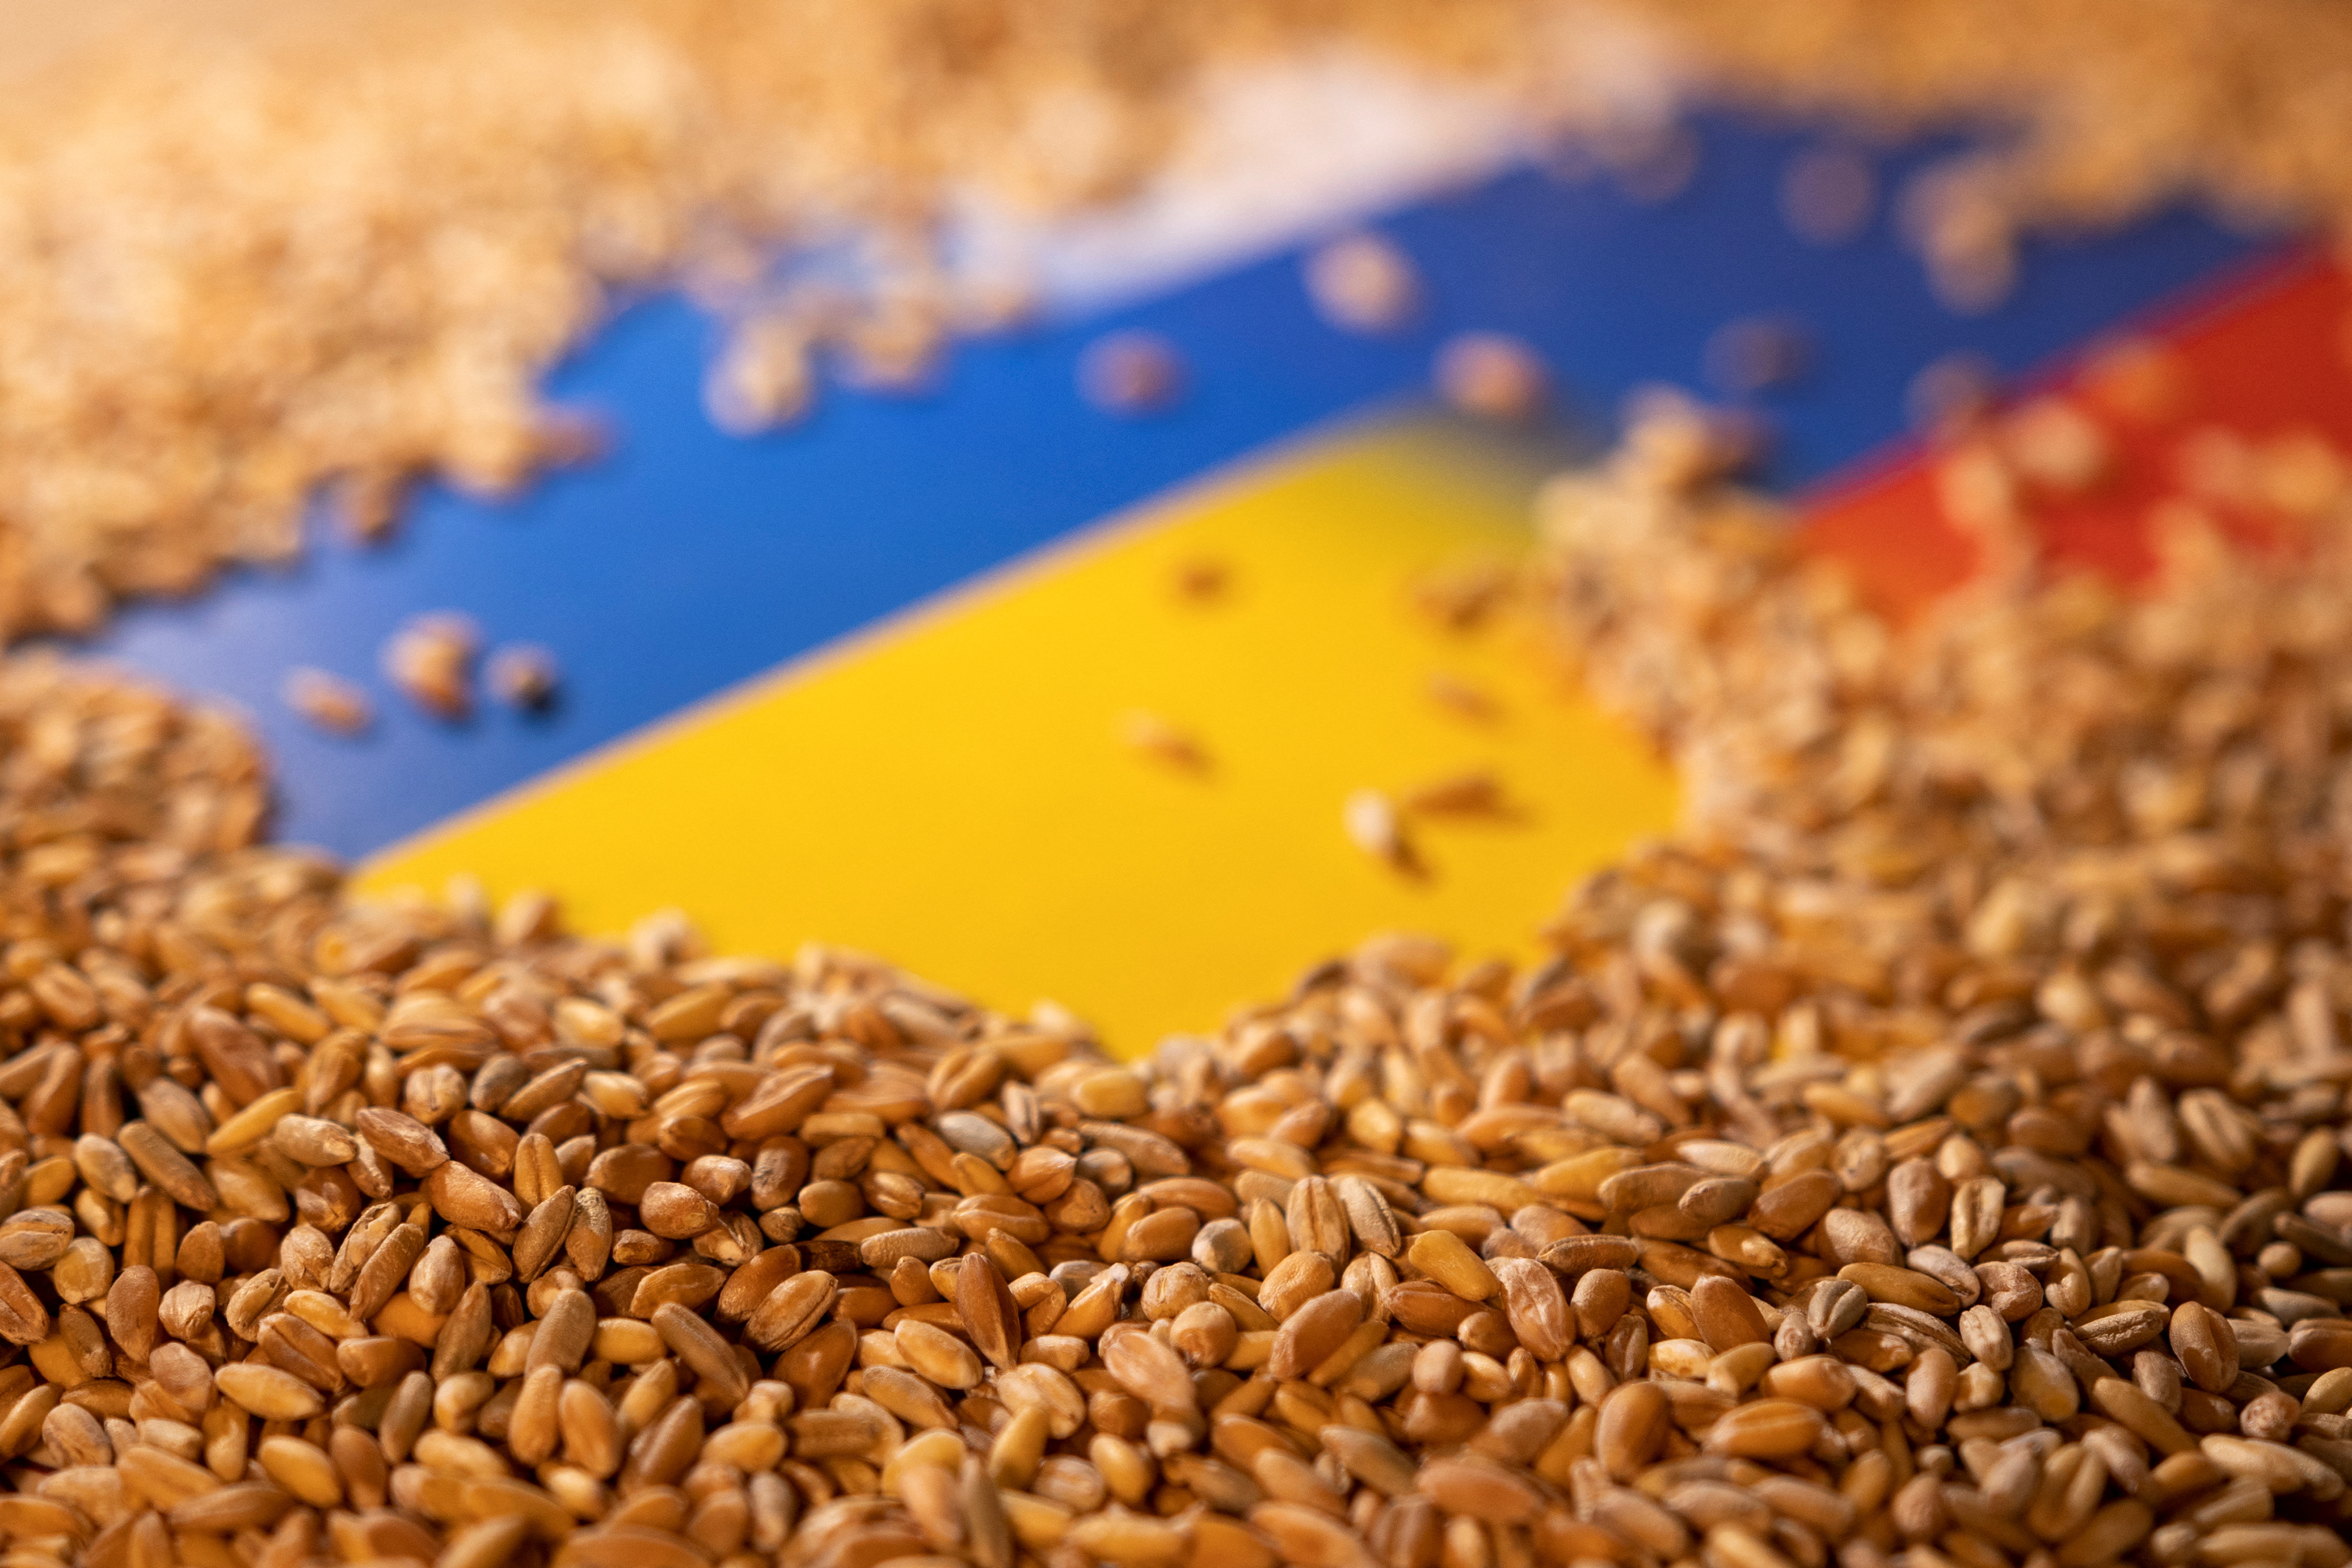 G7 to impose sanctions on grain exports from Ukraine — White House